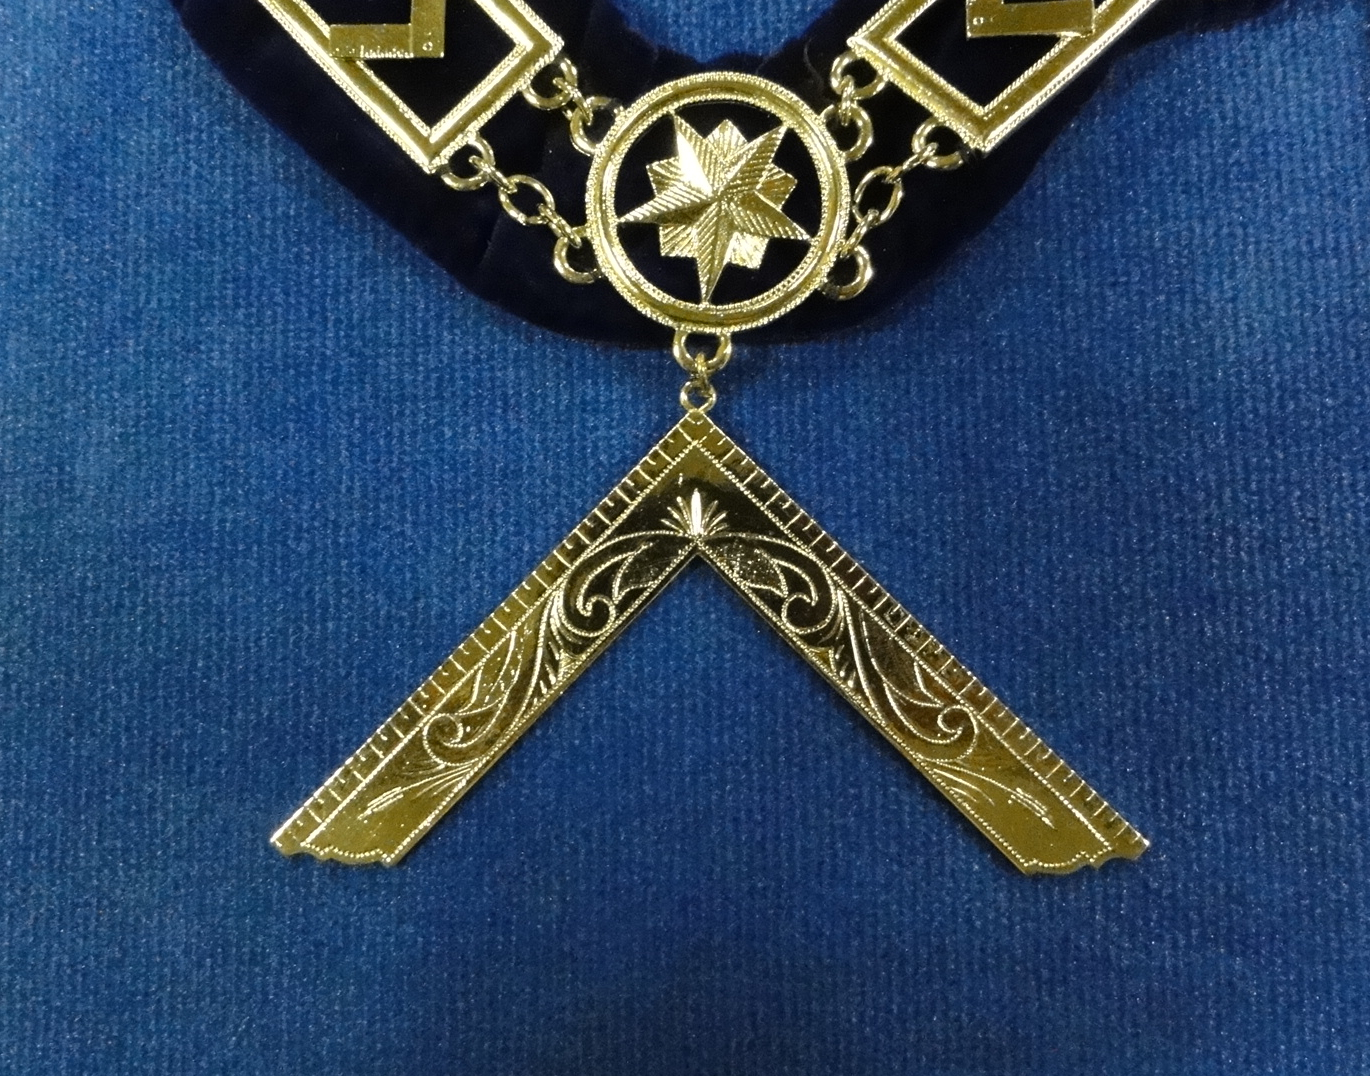 The Worshipful Master's Jewel, the square